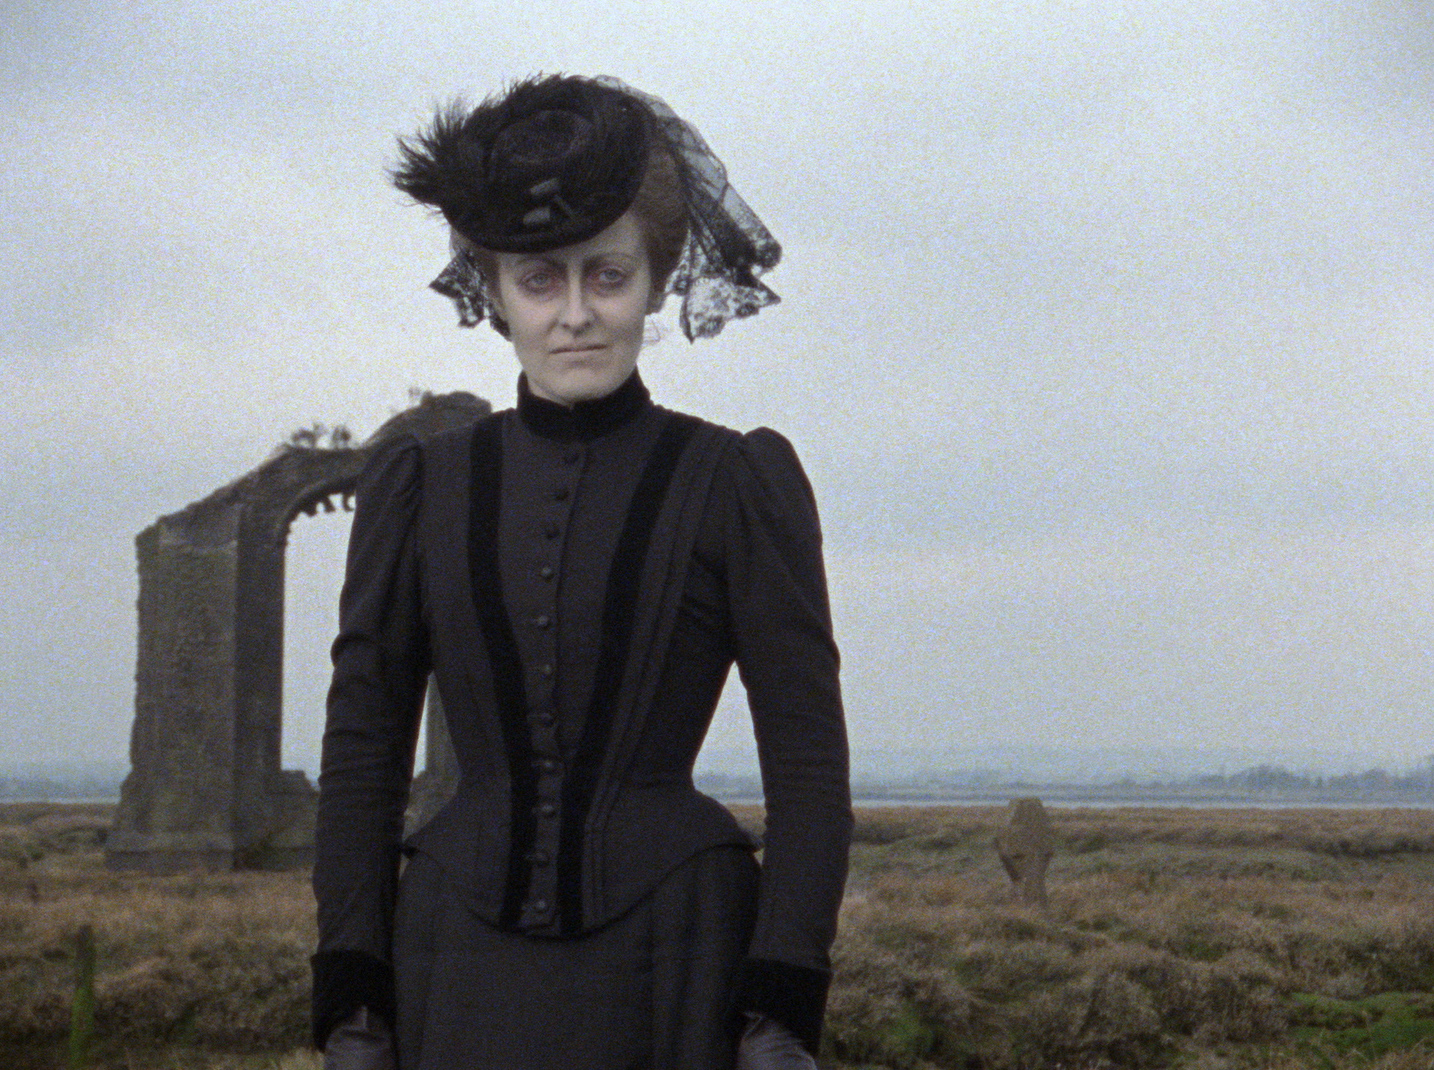 The Woman in Black review - a near-perfect old-fashioned ghost